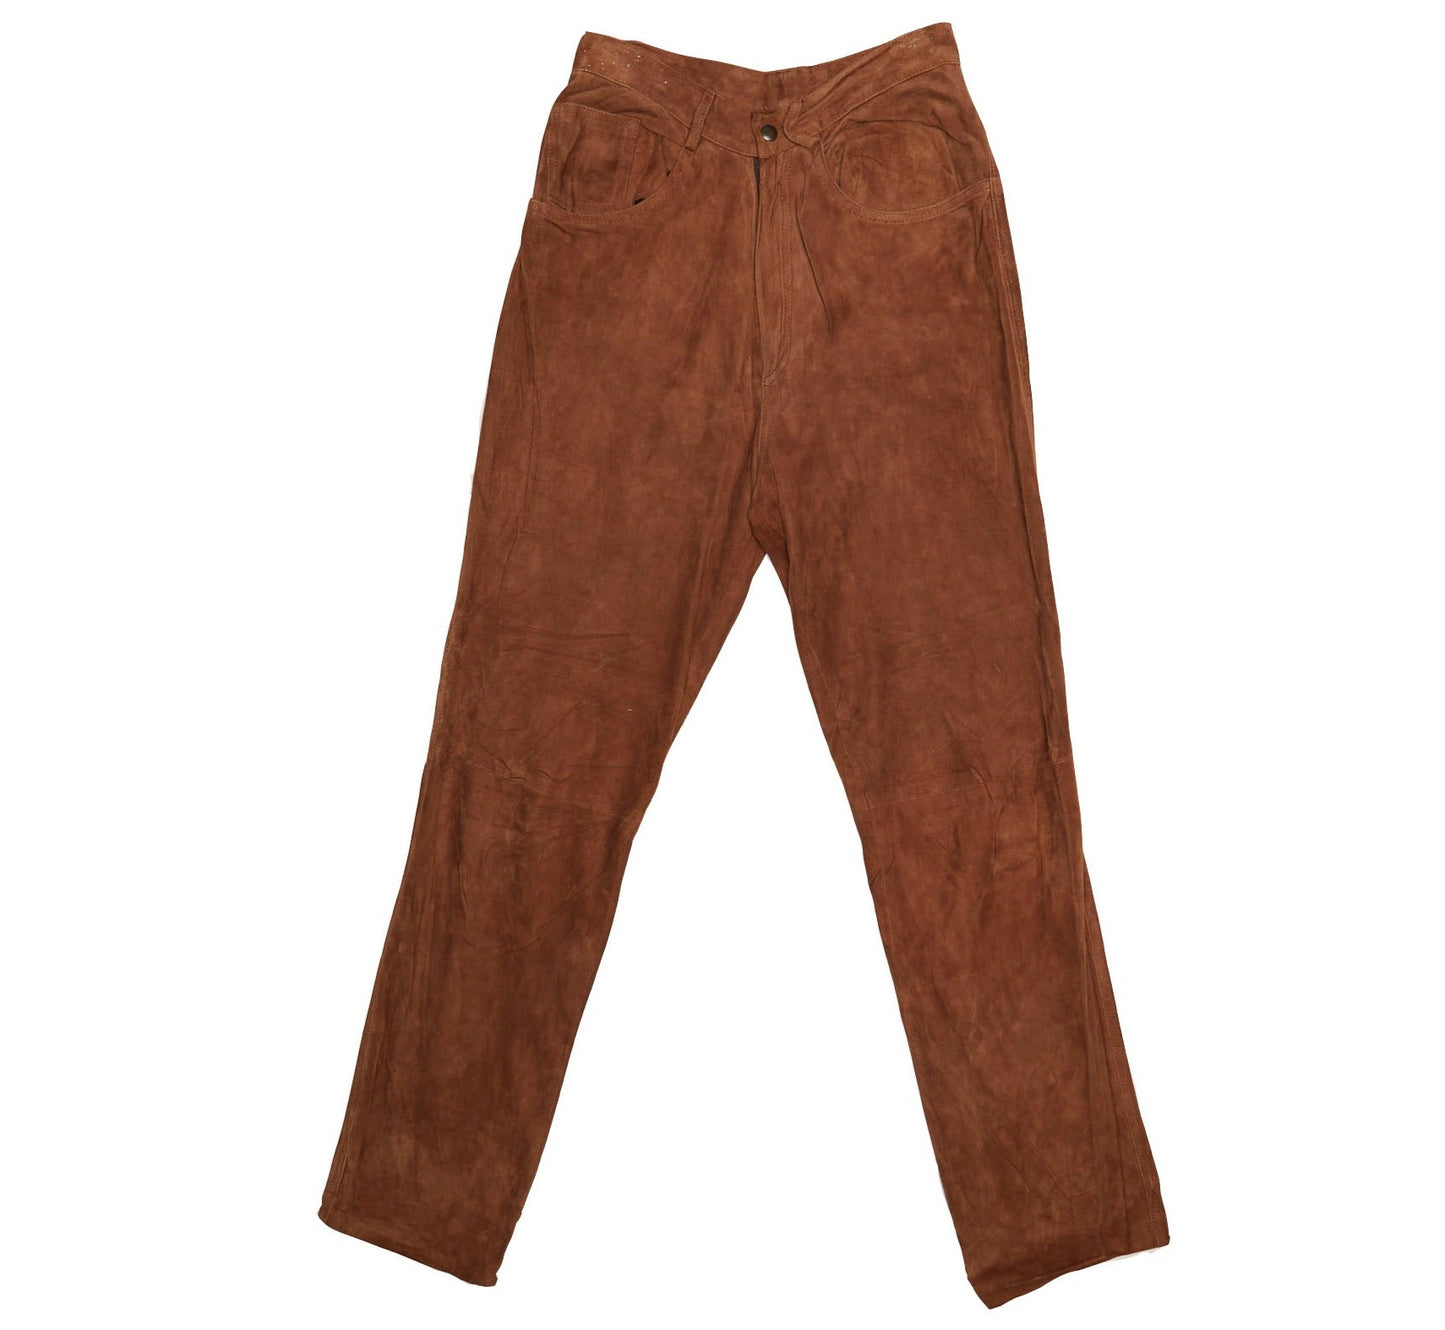 Womens Suede Trousers - W26" L28"